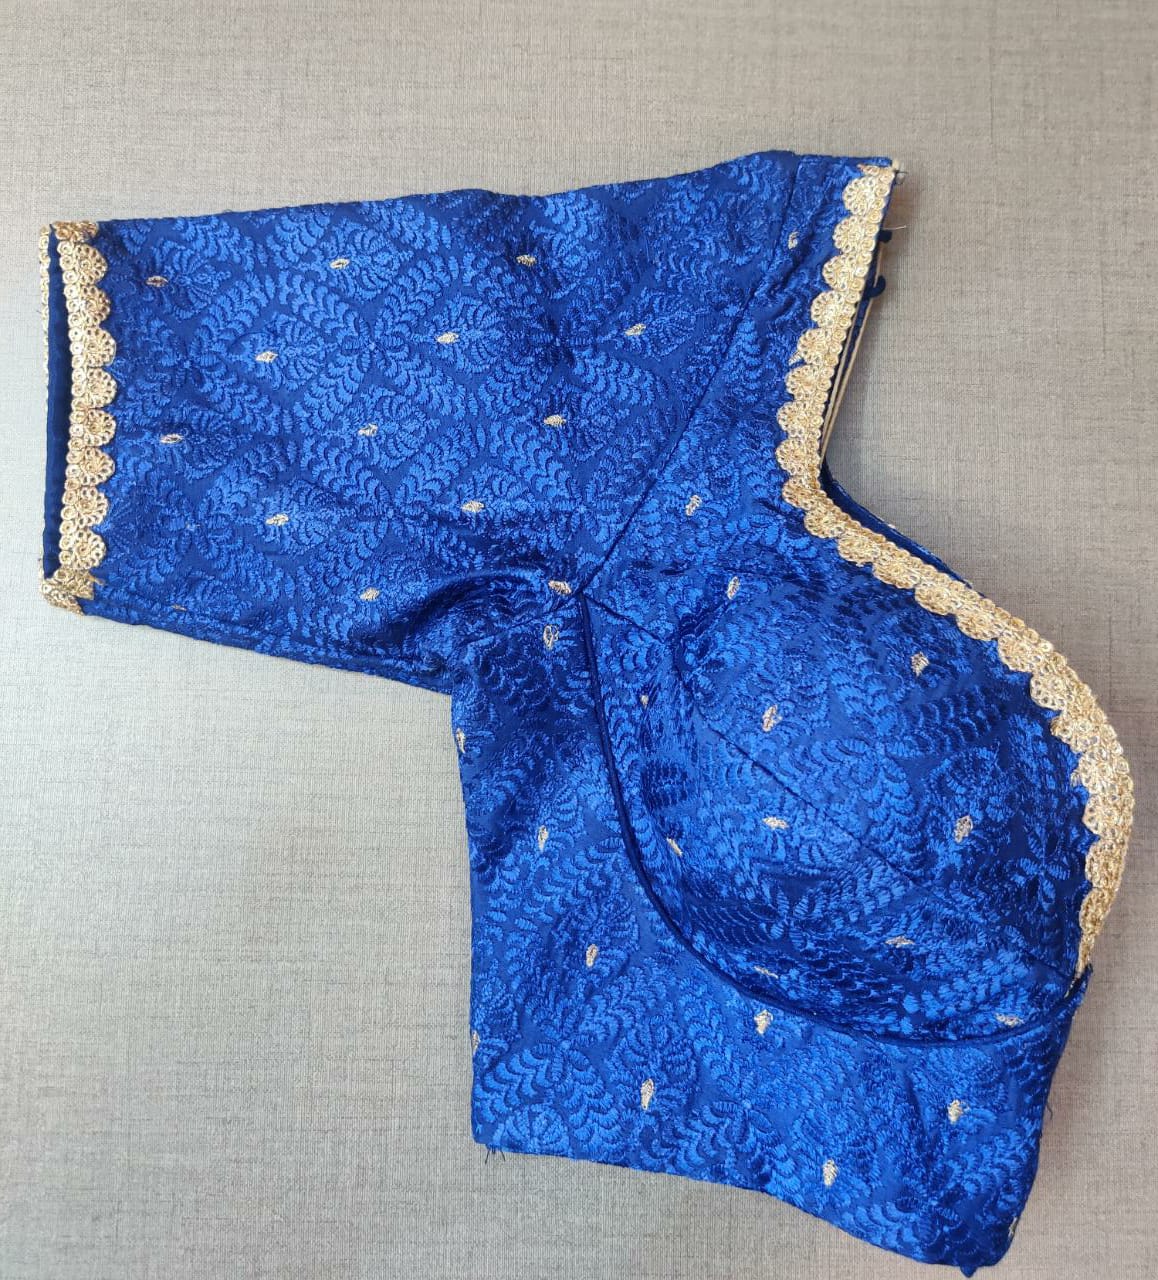 Buy stunning royal blue embroidered designer saree blouse online in USA. Elevate your Indian ethnic saree looks with beautiful readymade sari blouse, embroidered saree blouses, Banarasi saree blouse, designer saree blouses, sleeveless saree blouses from Pure Elegance Indian fashion store in USA.-sleeves